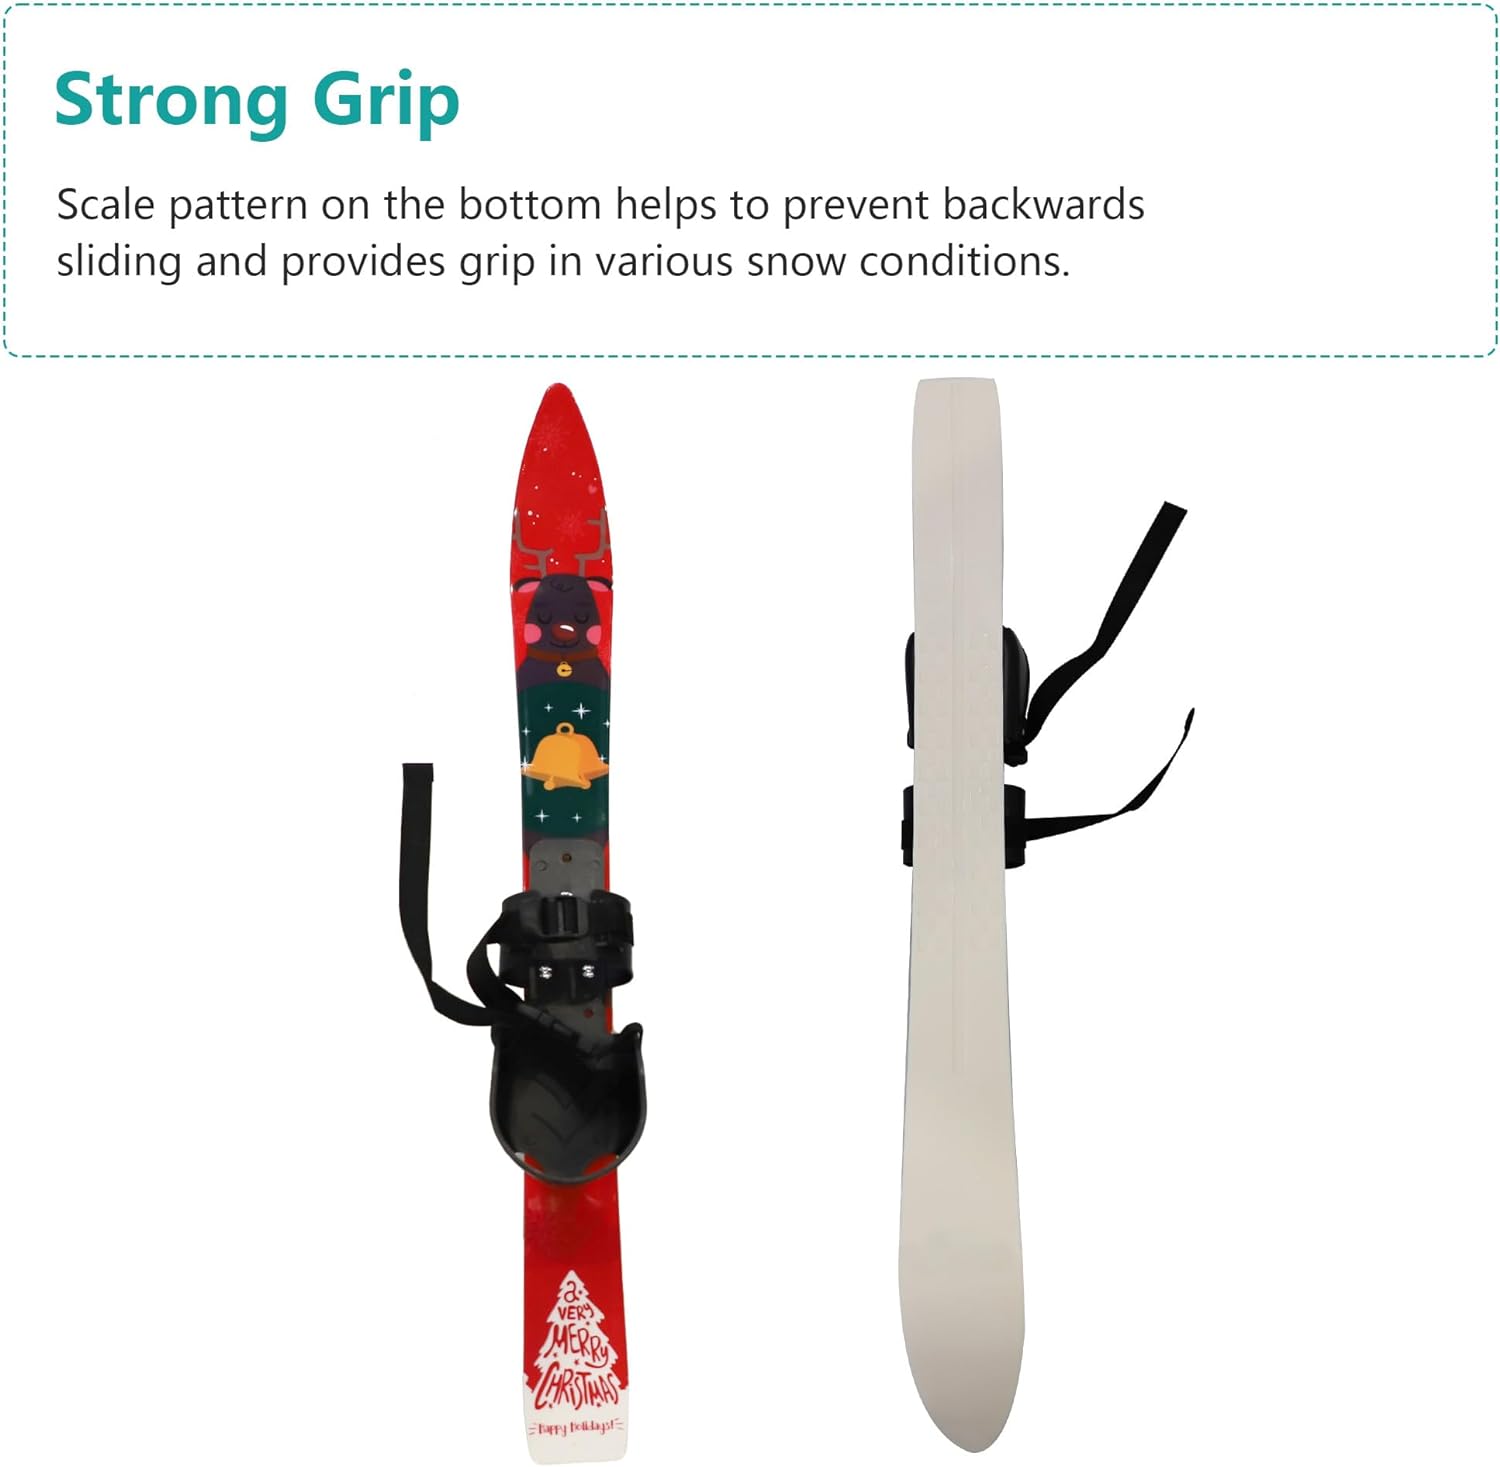 Snow Ski and Pole Set with Bindings 25.6" Ski Boards for Kids Age 2-4 Beginners, Red